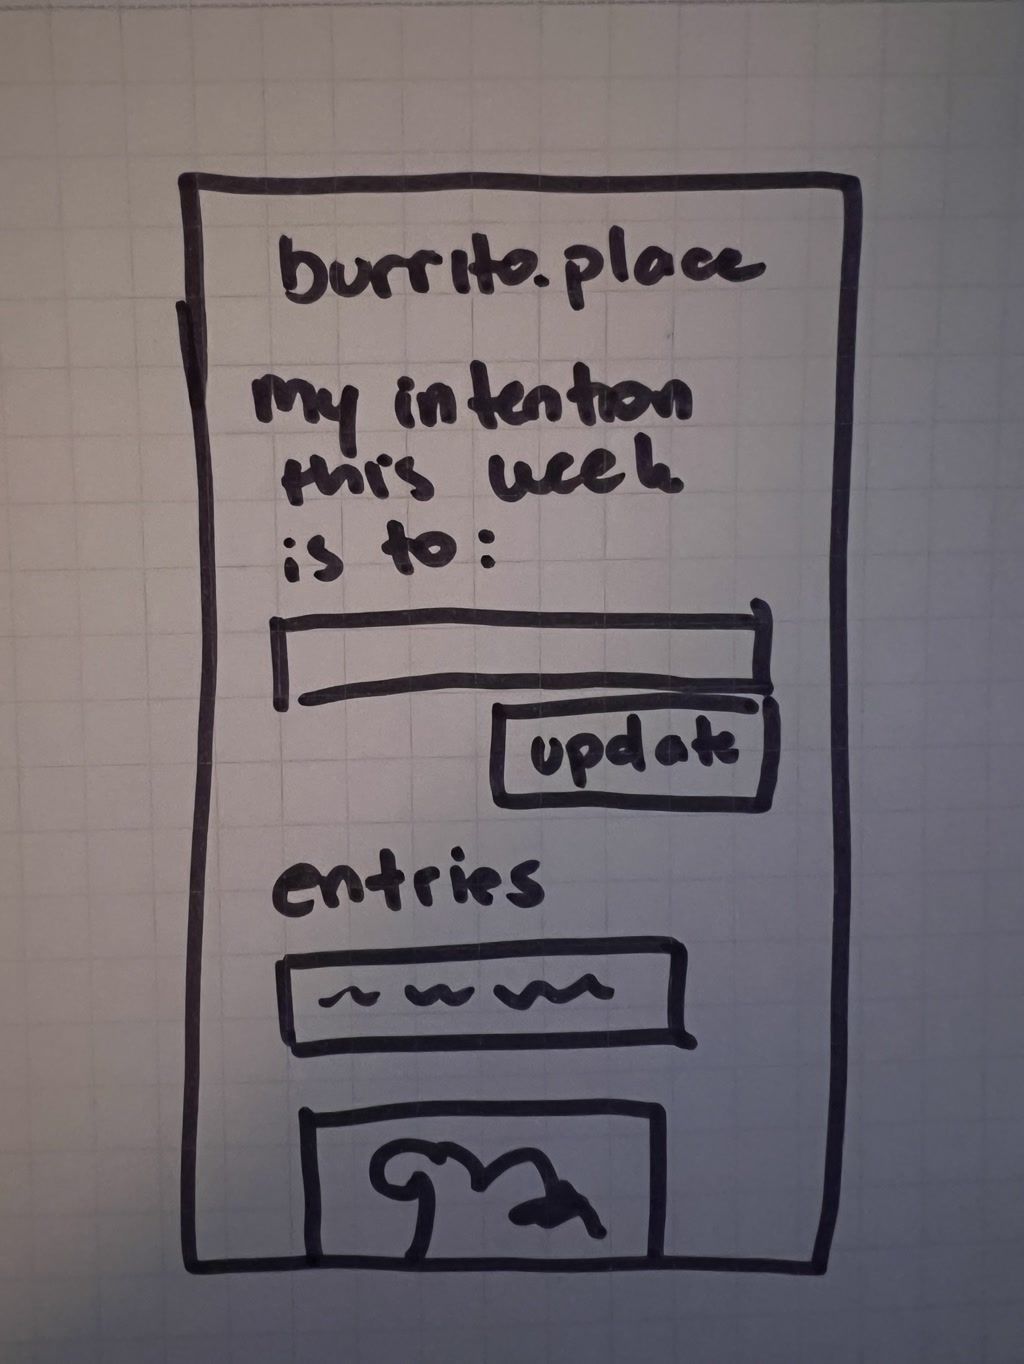 A hand-drawn sketch resembling a web or mobile application interface. It features a header with the text 'burrito.place' followed by a subtitle stating 'my intention this week is to:'. Below the subtitle are two sections, one with the word 'entries' and another with squiggly lines suggesting content. There's a button or tab at the top right of the second section labeled with the word 'update'. The bottom of the sketch has a drawing that appears to represent a wave or a mountain.